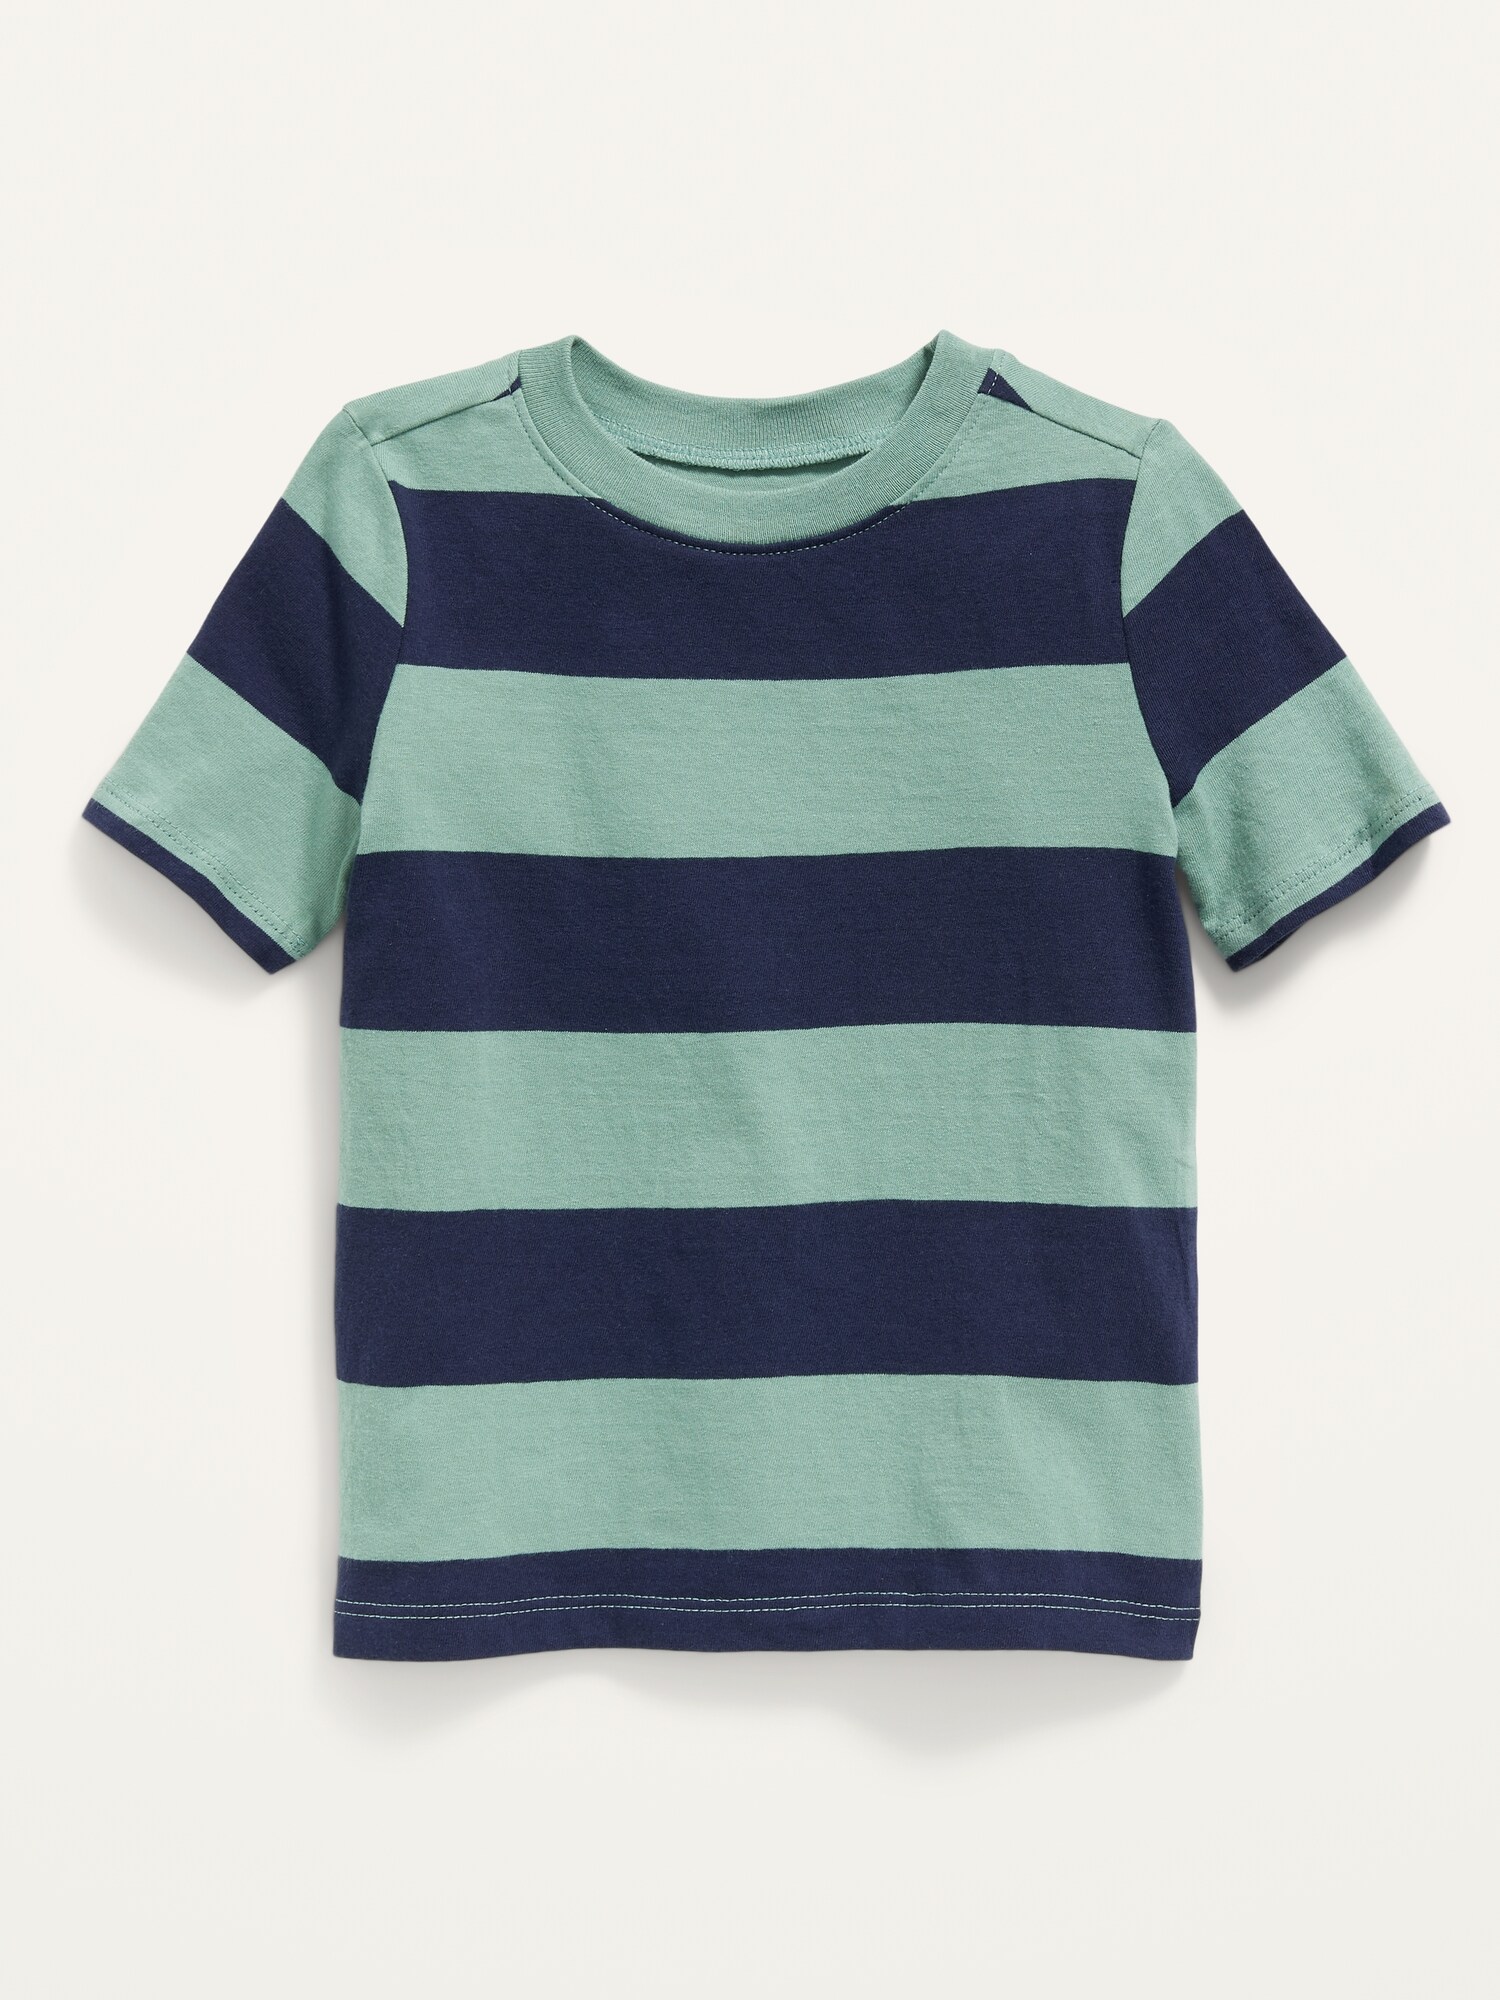 Old navy striped tee